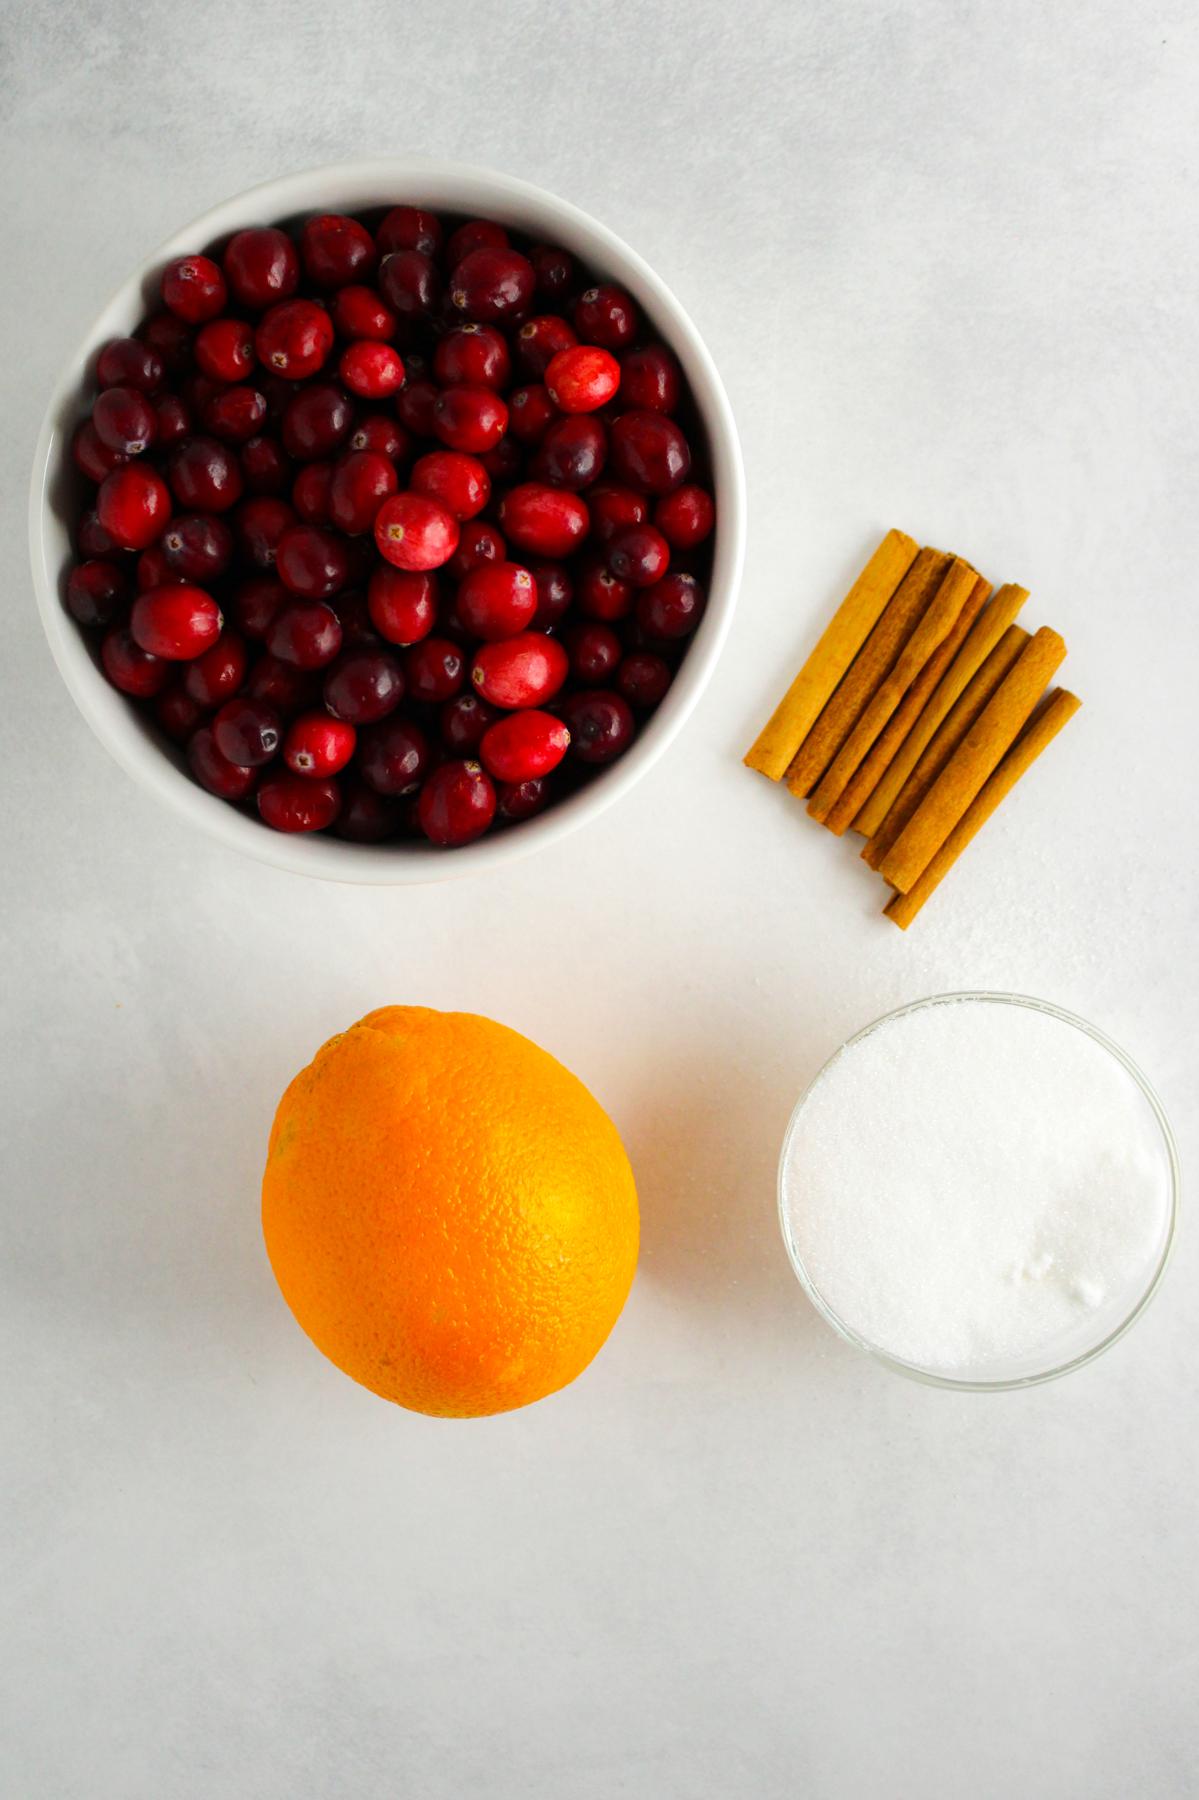 Ingredients for cranberry sauce: fresh cranberries in a bowl, cinnamon sticks, small bowl of white sugar and an orange.